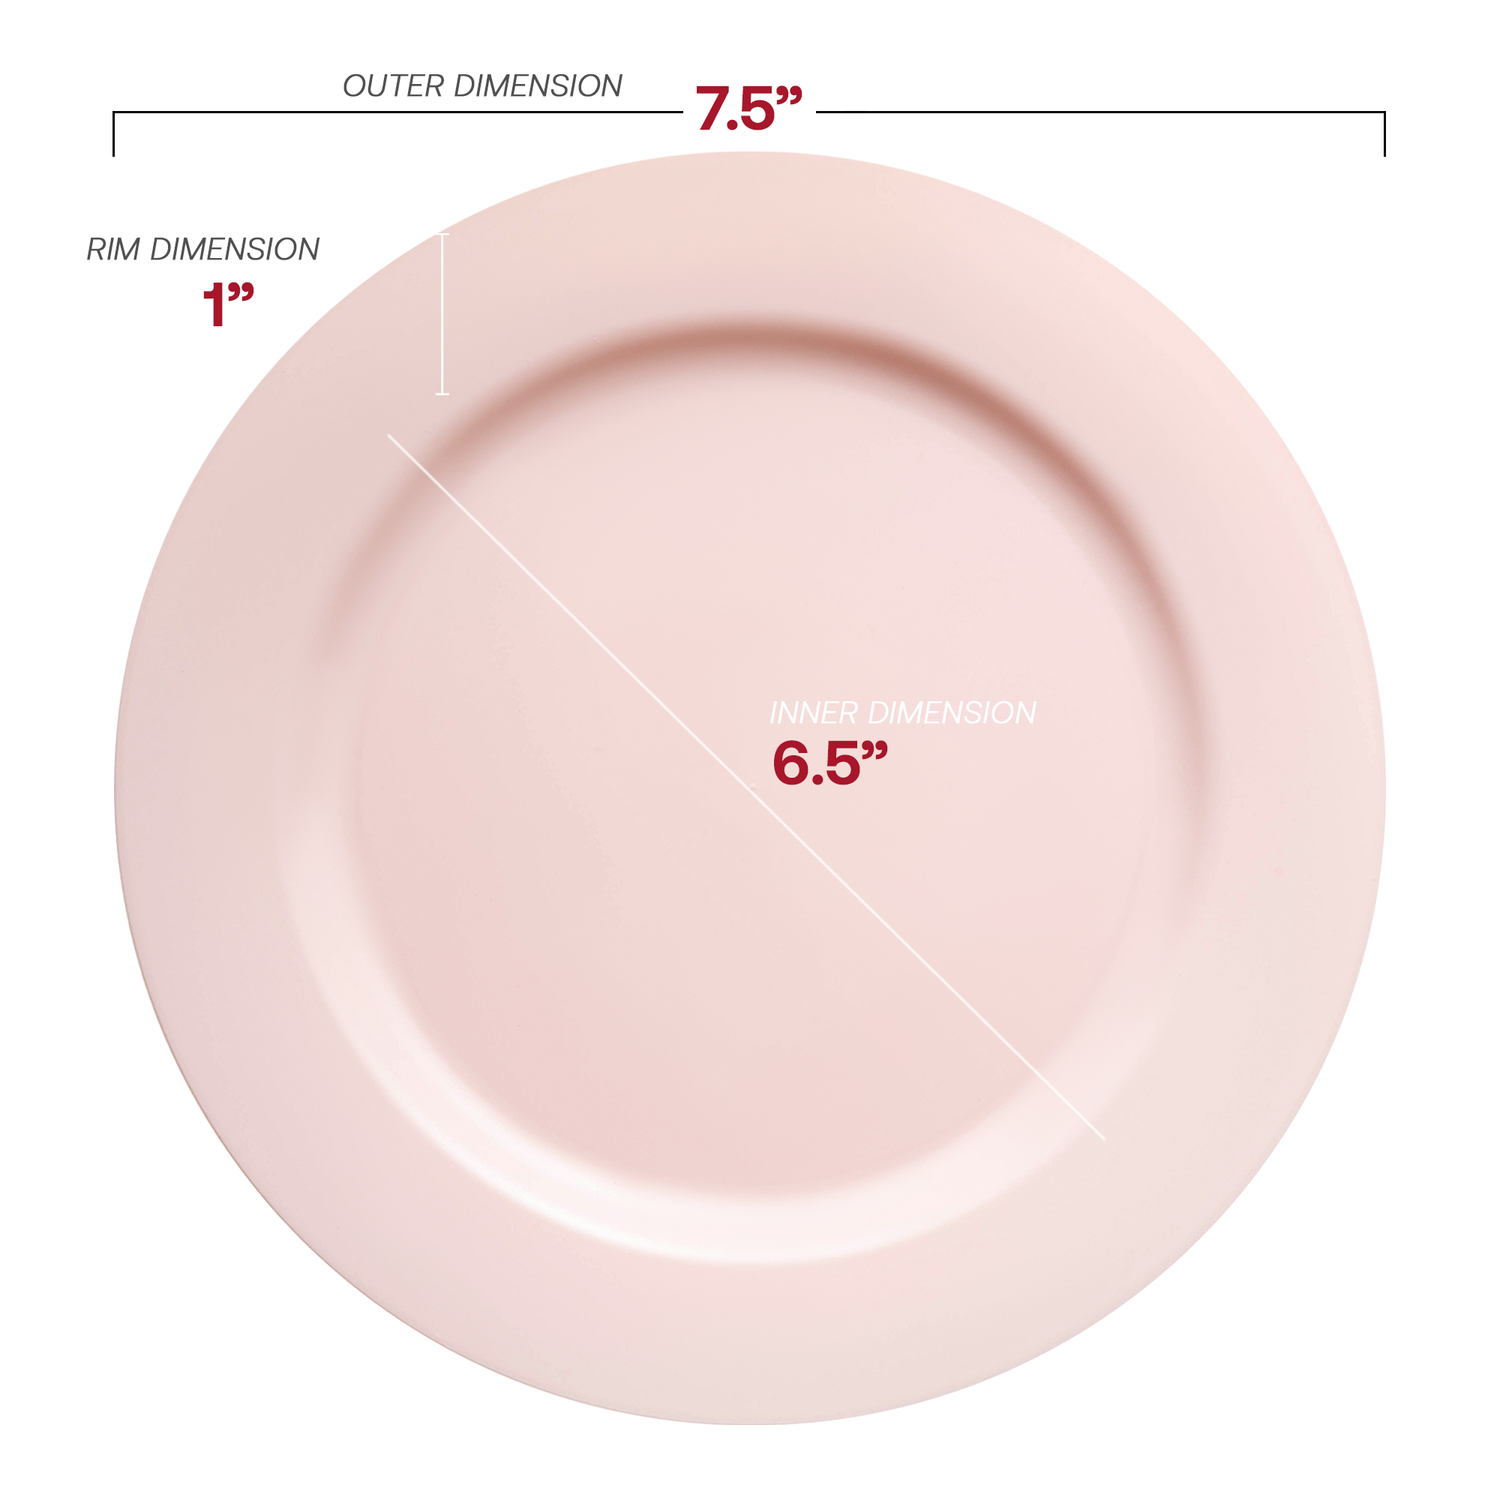 Matte Pink Round Disposable Plastic Appetizer/Salad Plates (7.5") Dimension | The Kaya Collection